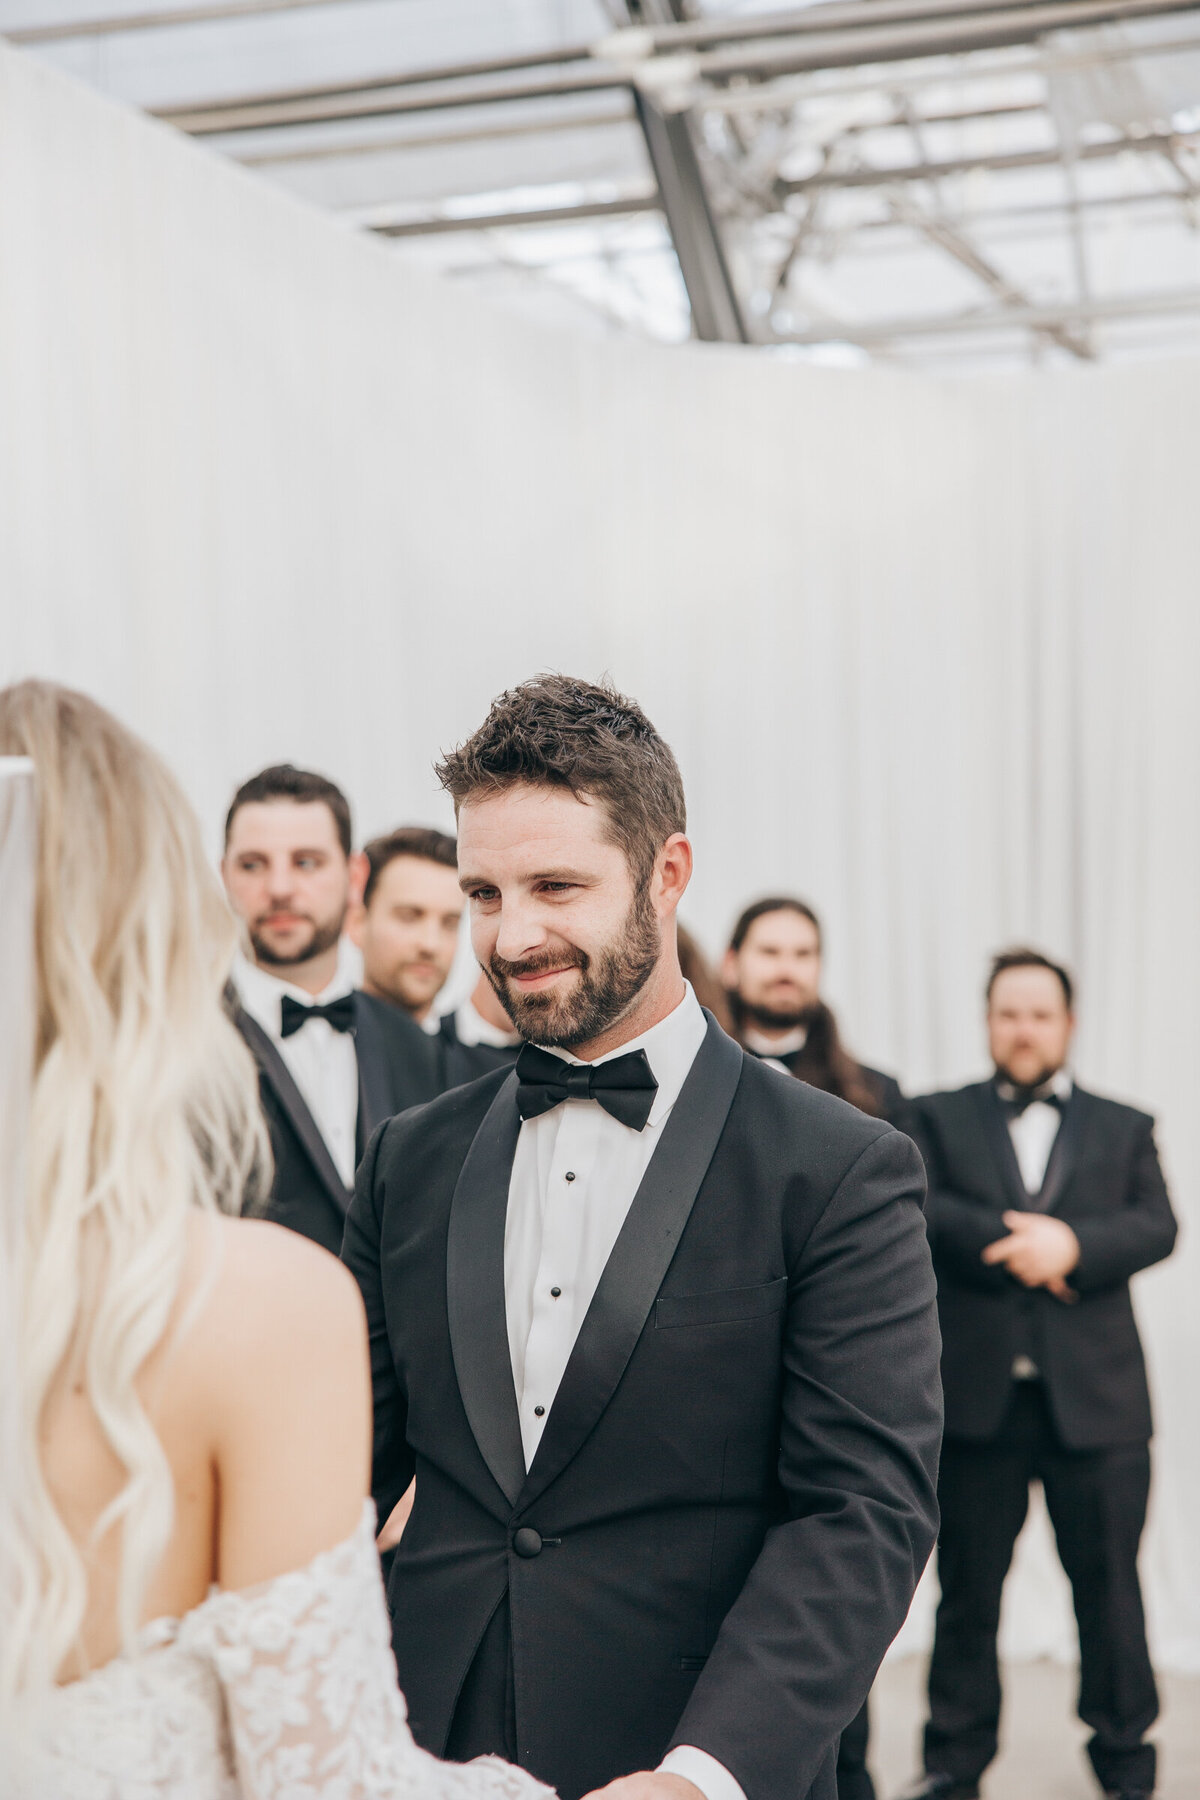 Candid moment of groom smiling photographed by Nova Markina